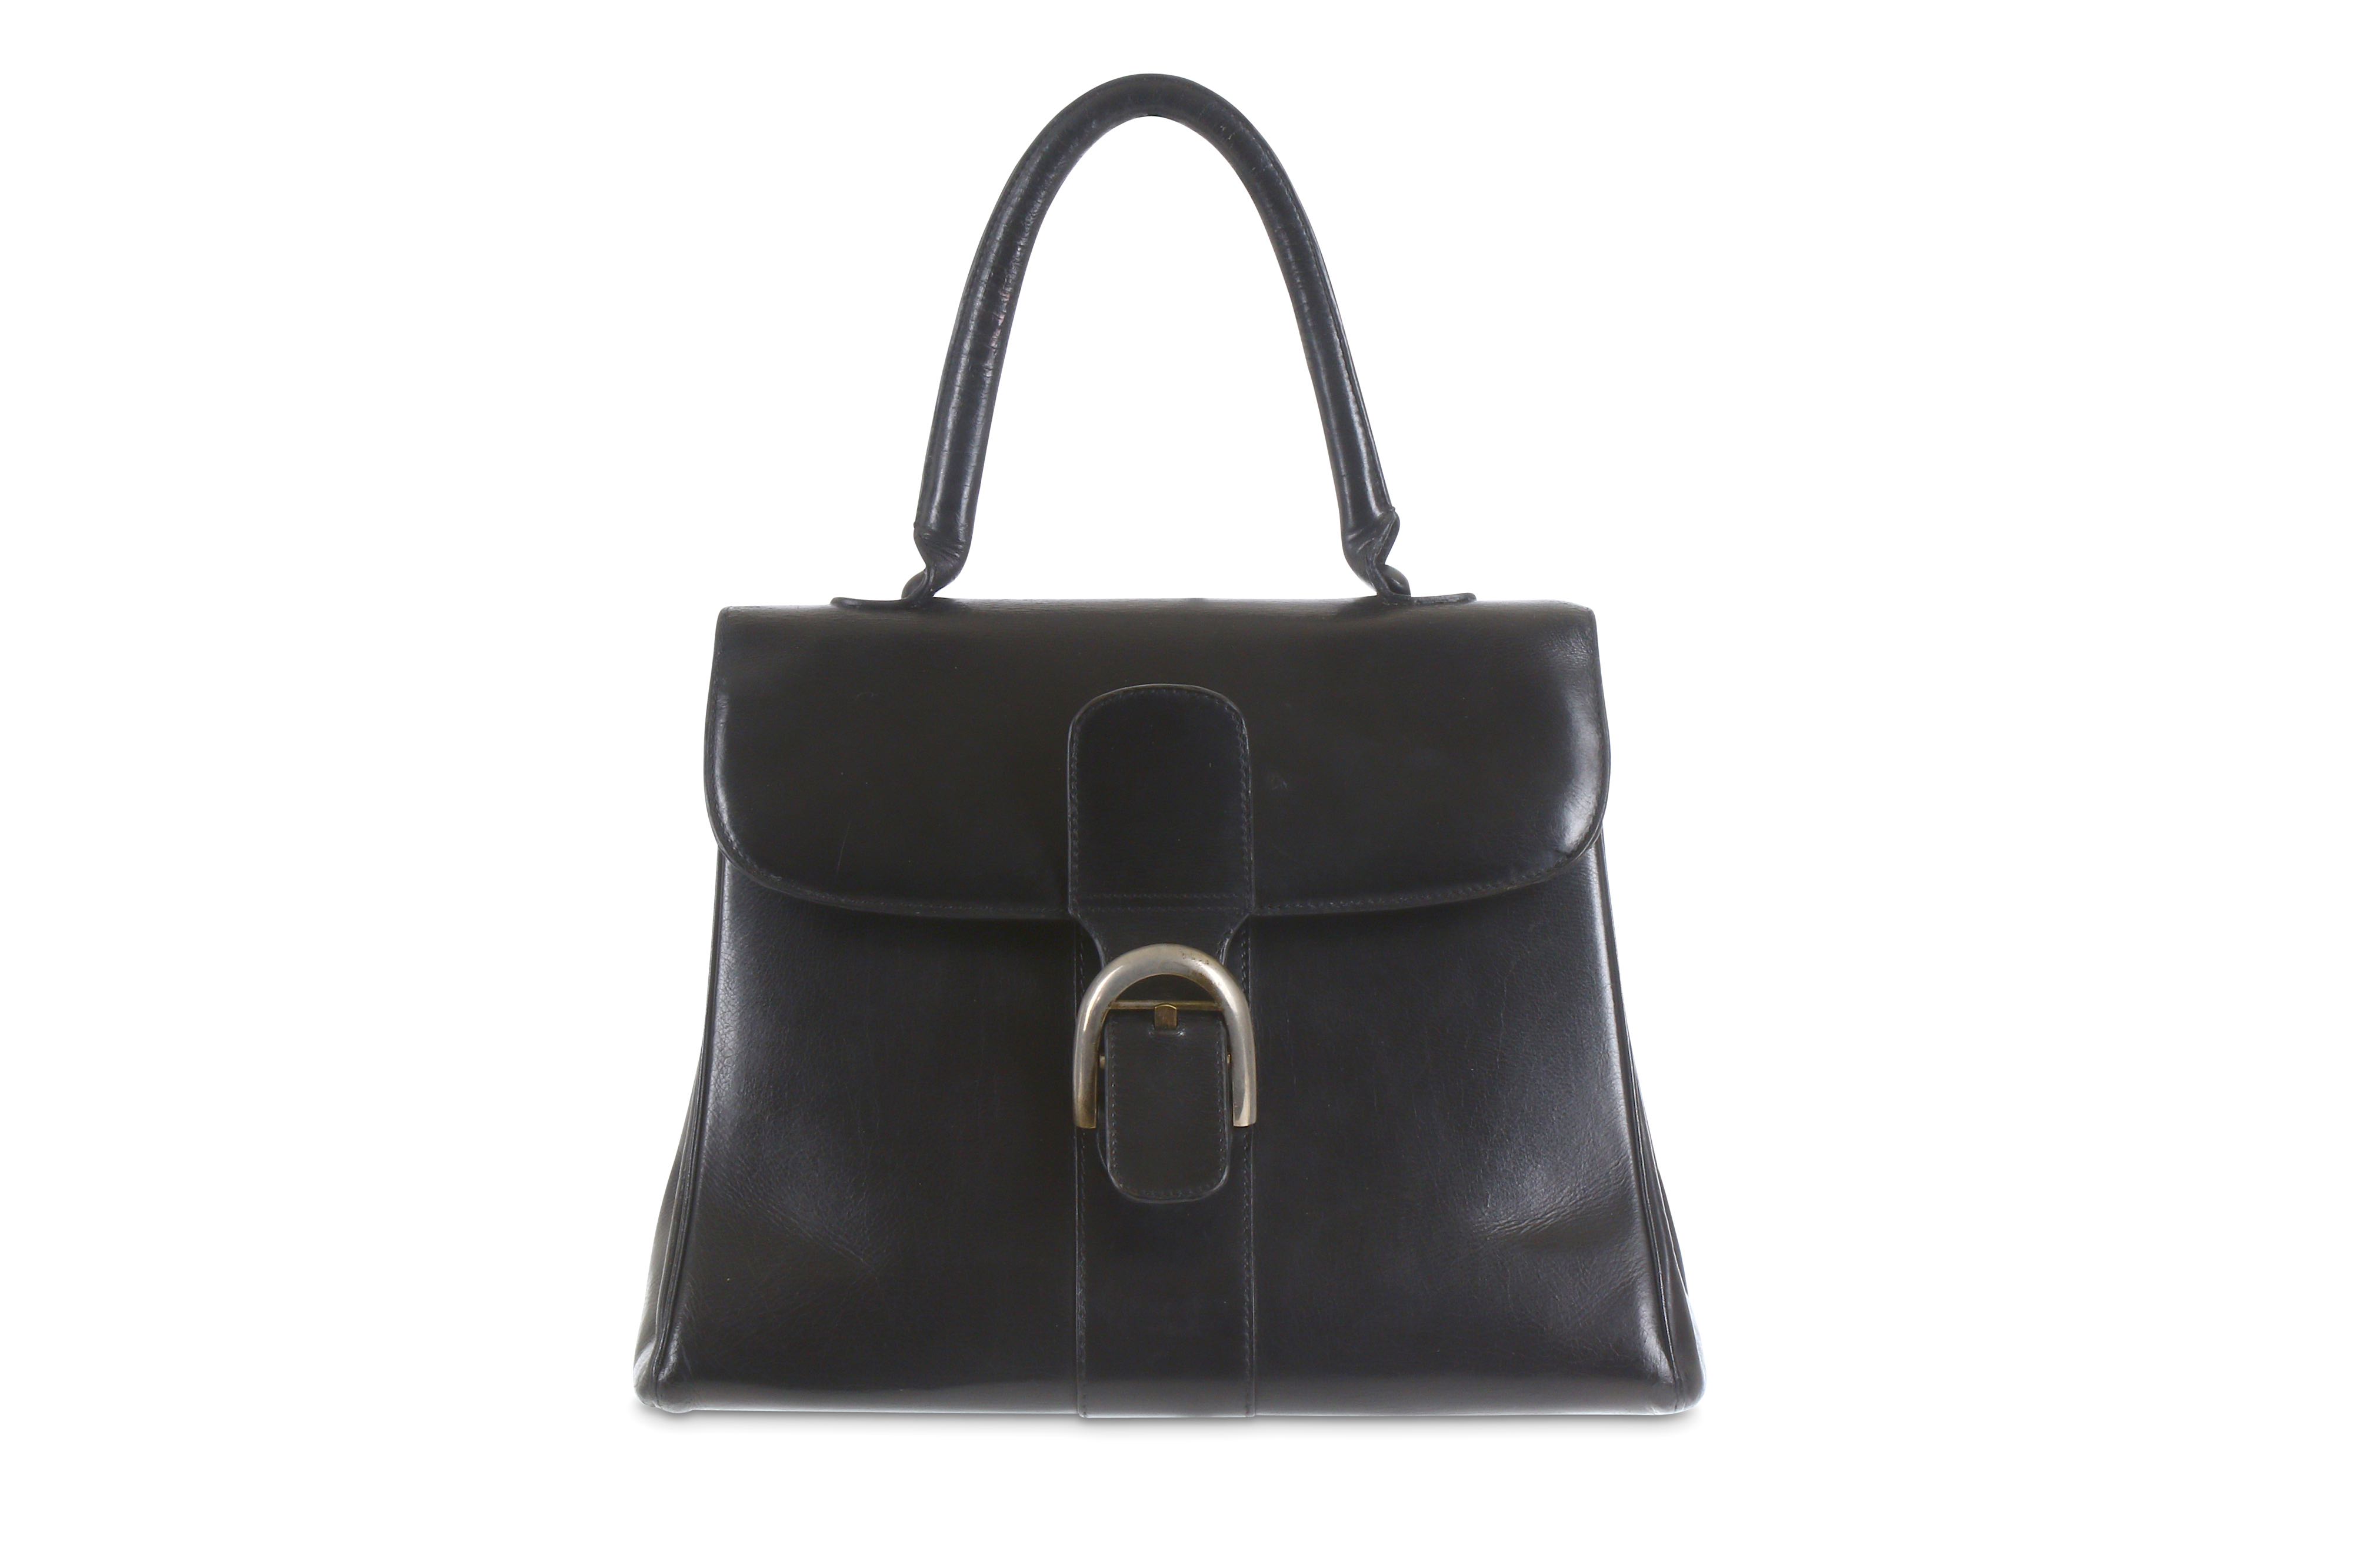 Delvaux Bags for Sale in Online Auctions